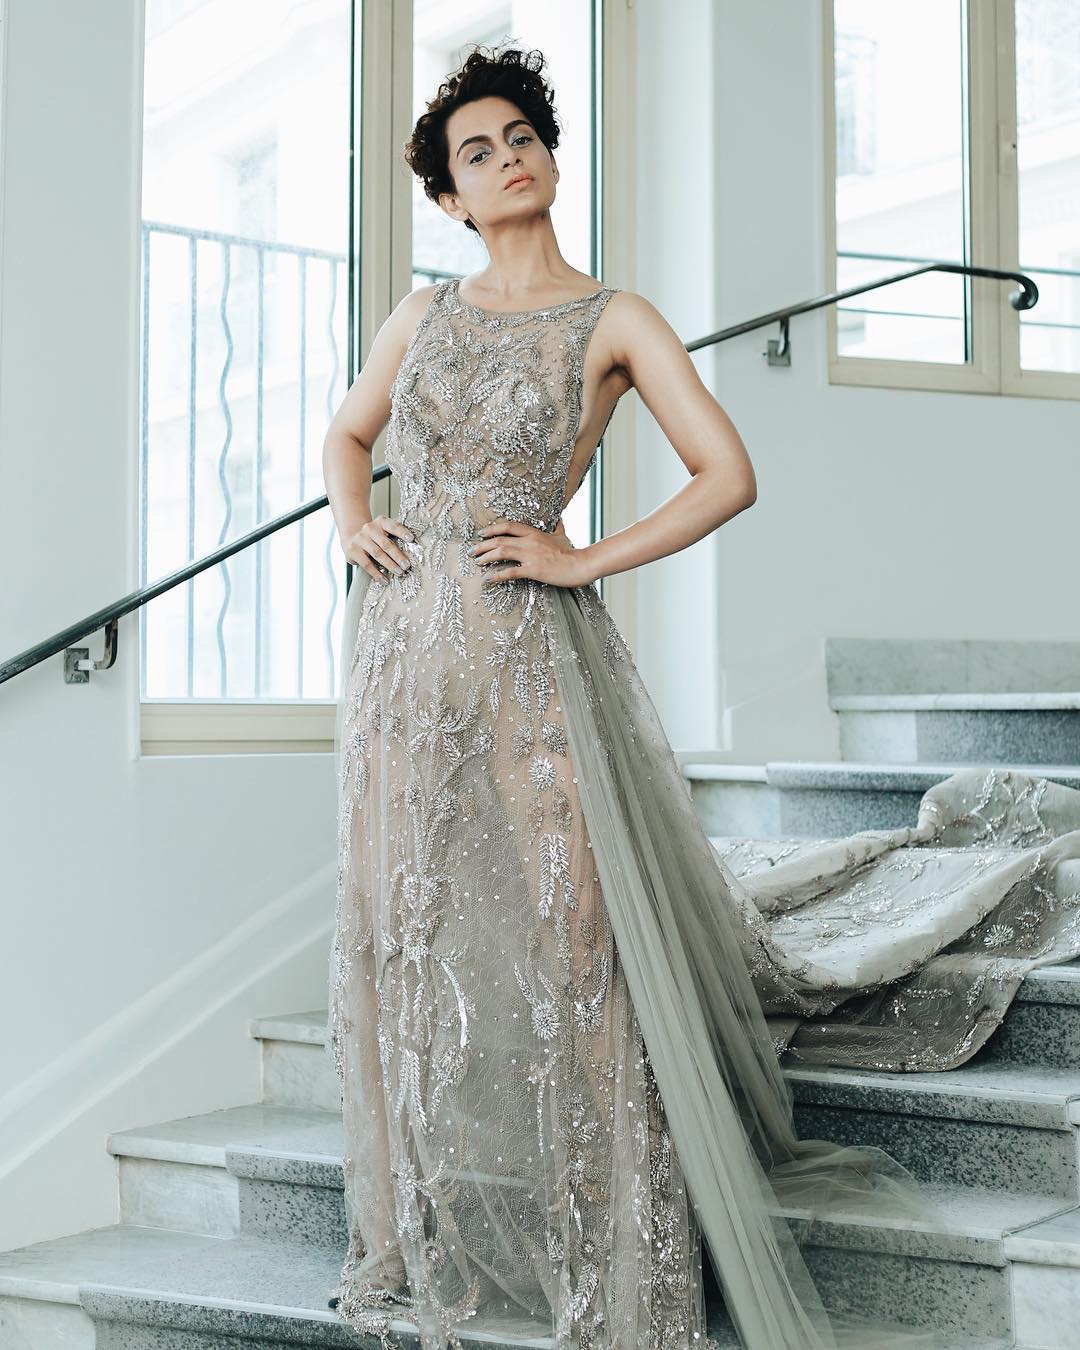 Kangana Ranaut  in a long, trailing gown